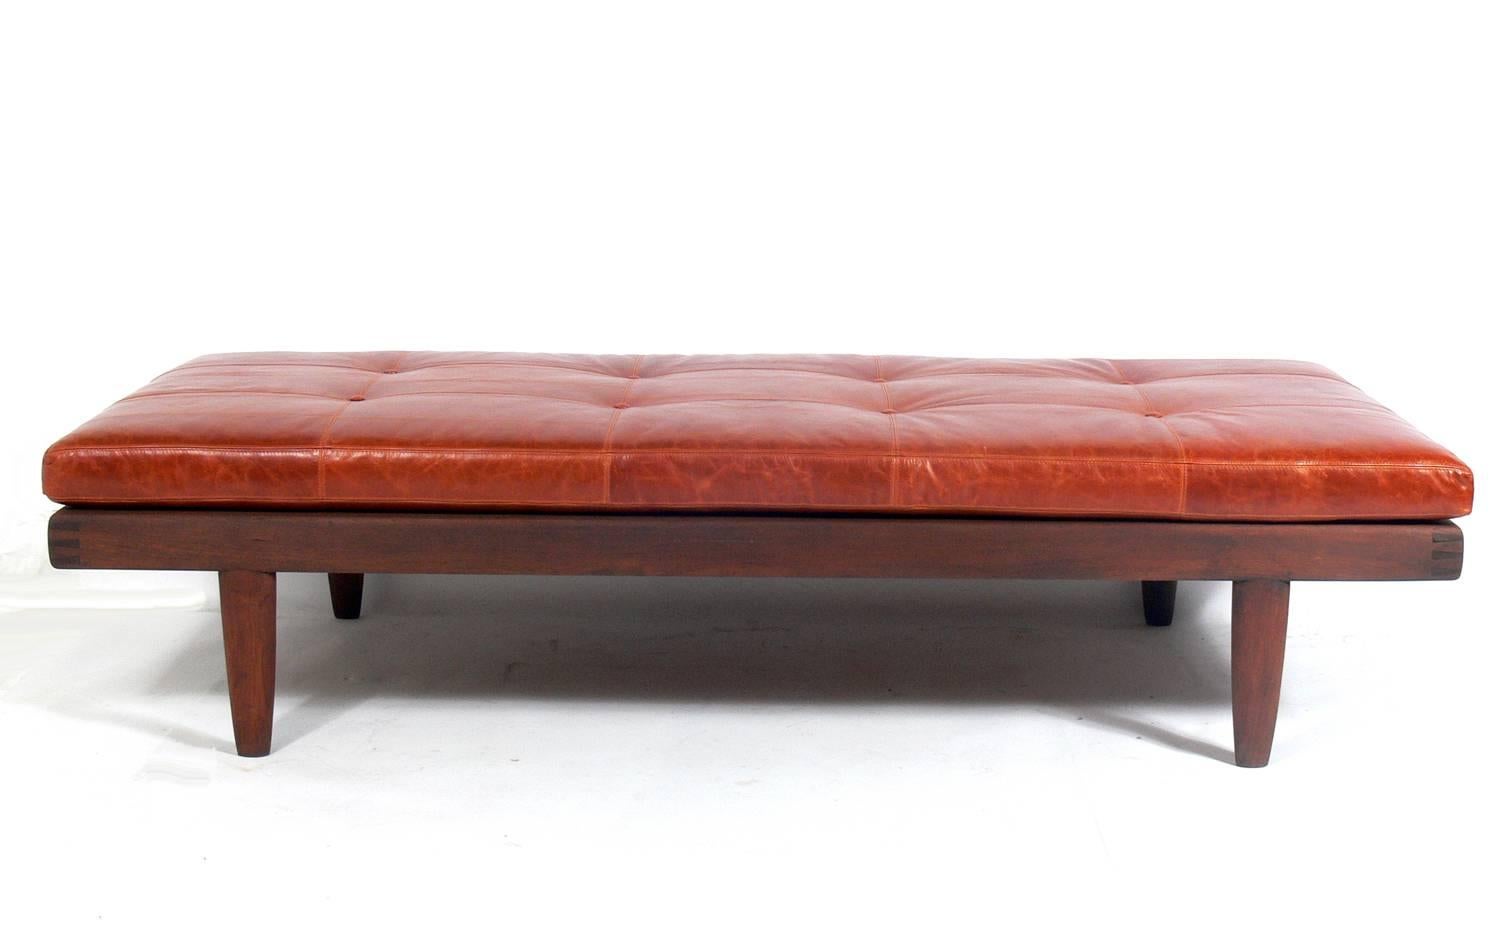 Clean lined walnut daybed attributed to George Nakashima for Widdicomb, unsigned, American, circa 1950s.